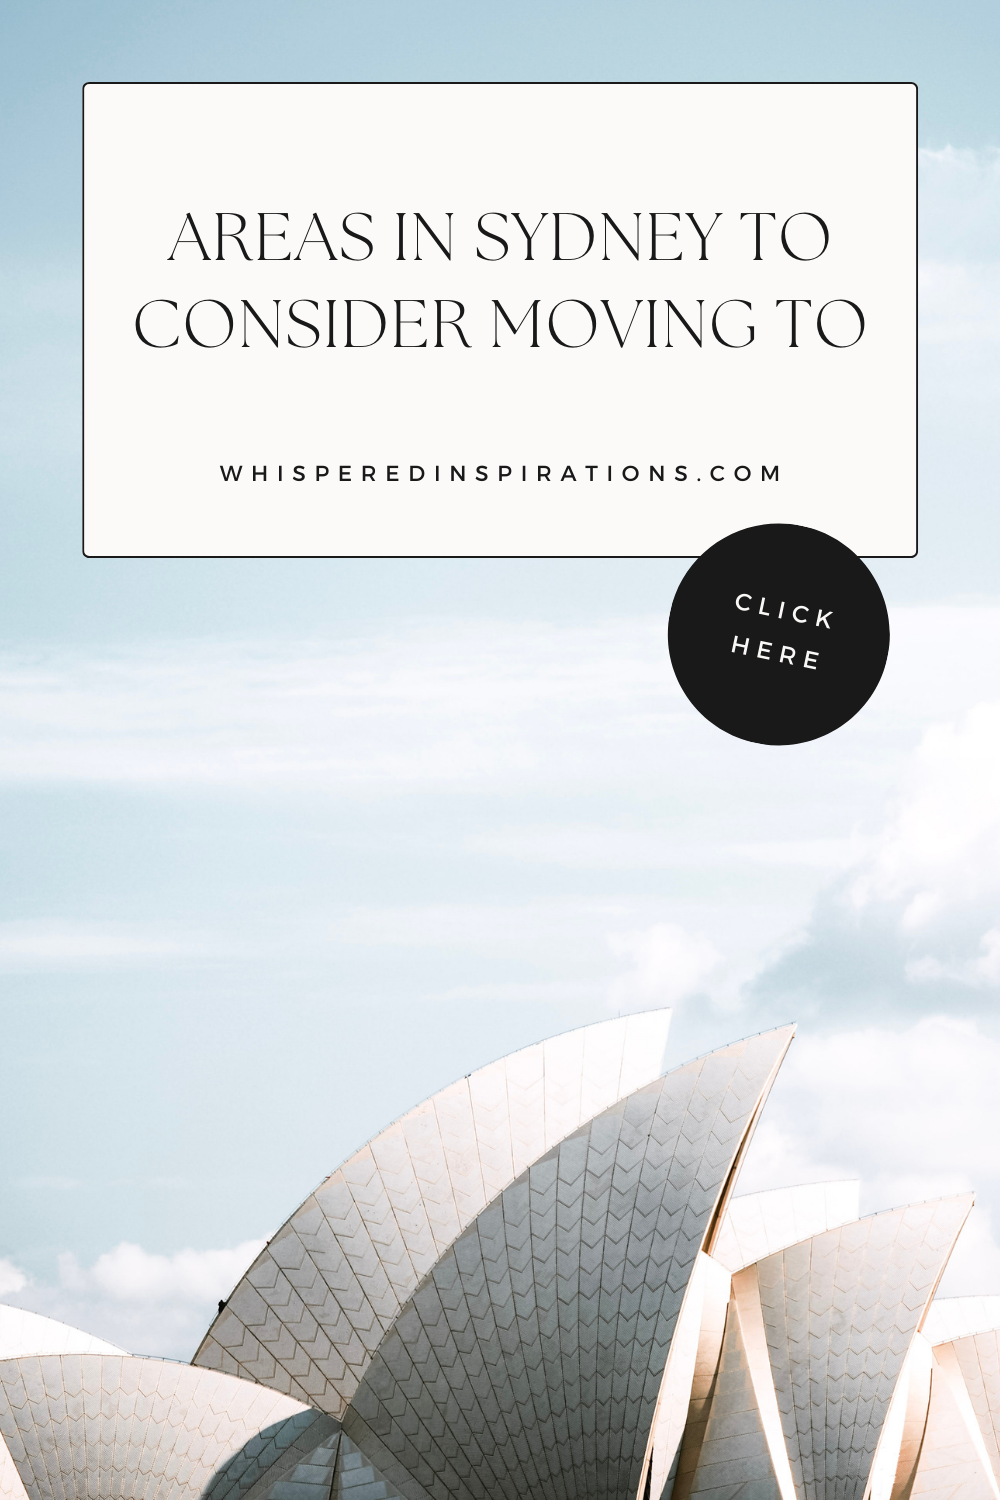 The Sydney Opera House is shown against the city line. This article covers areas in Sydney to consider moving to.